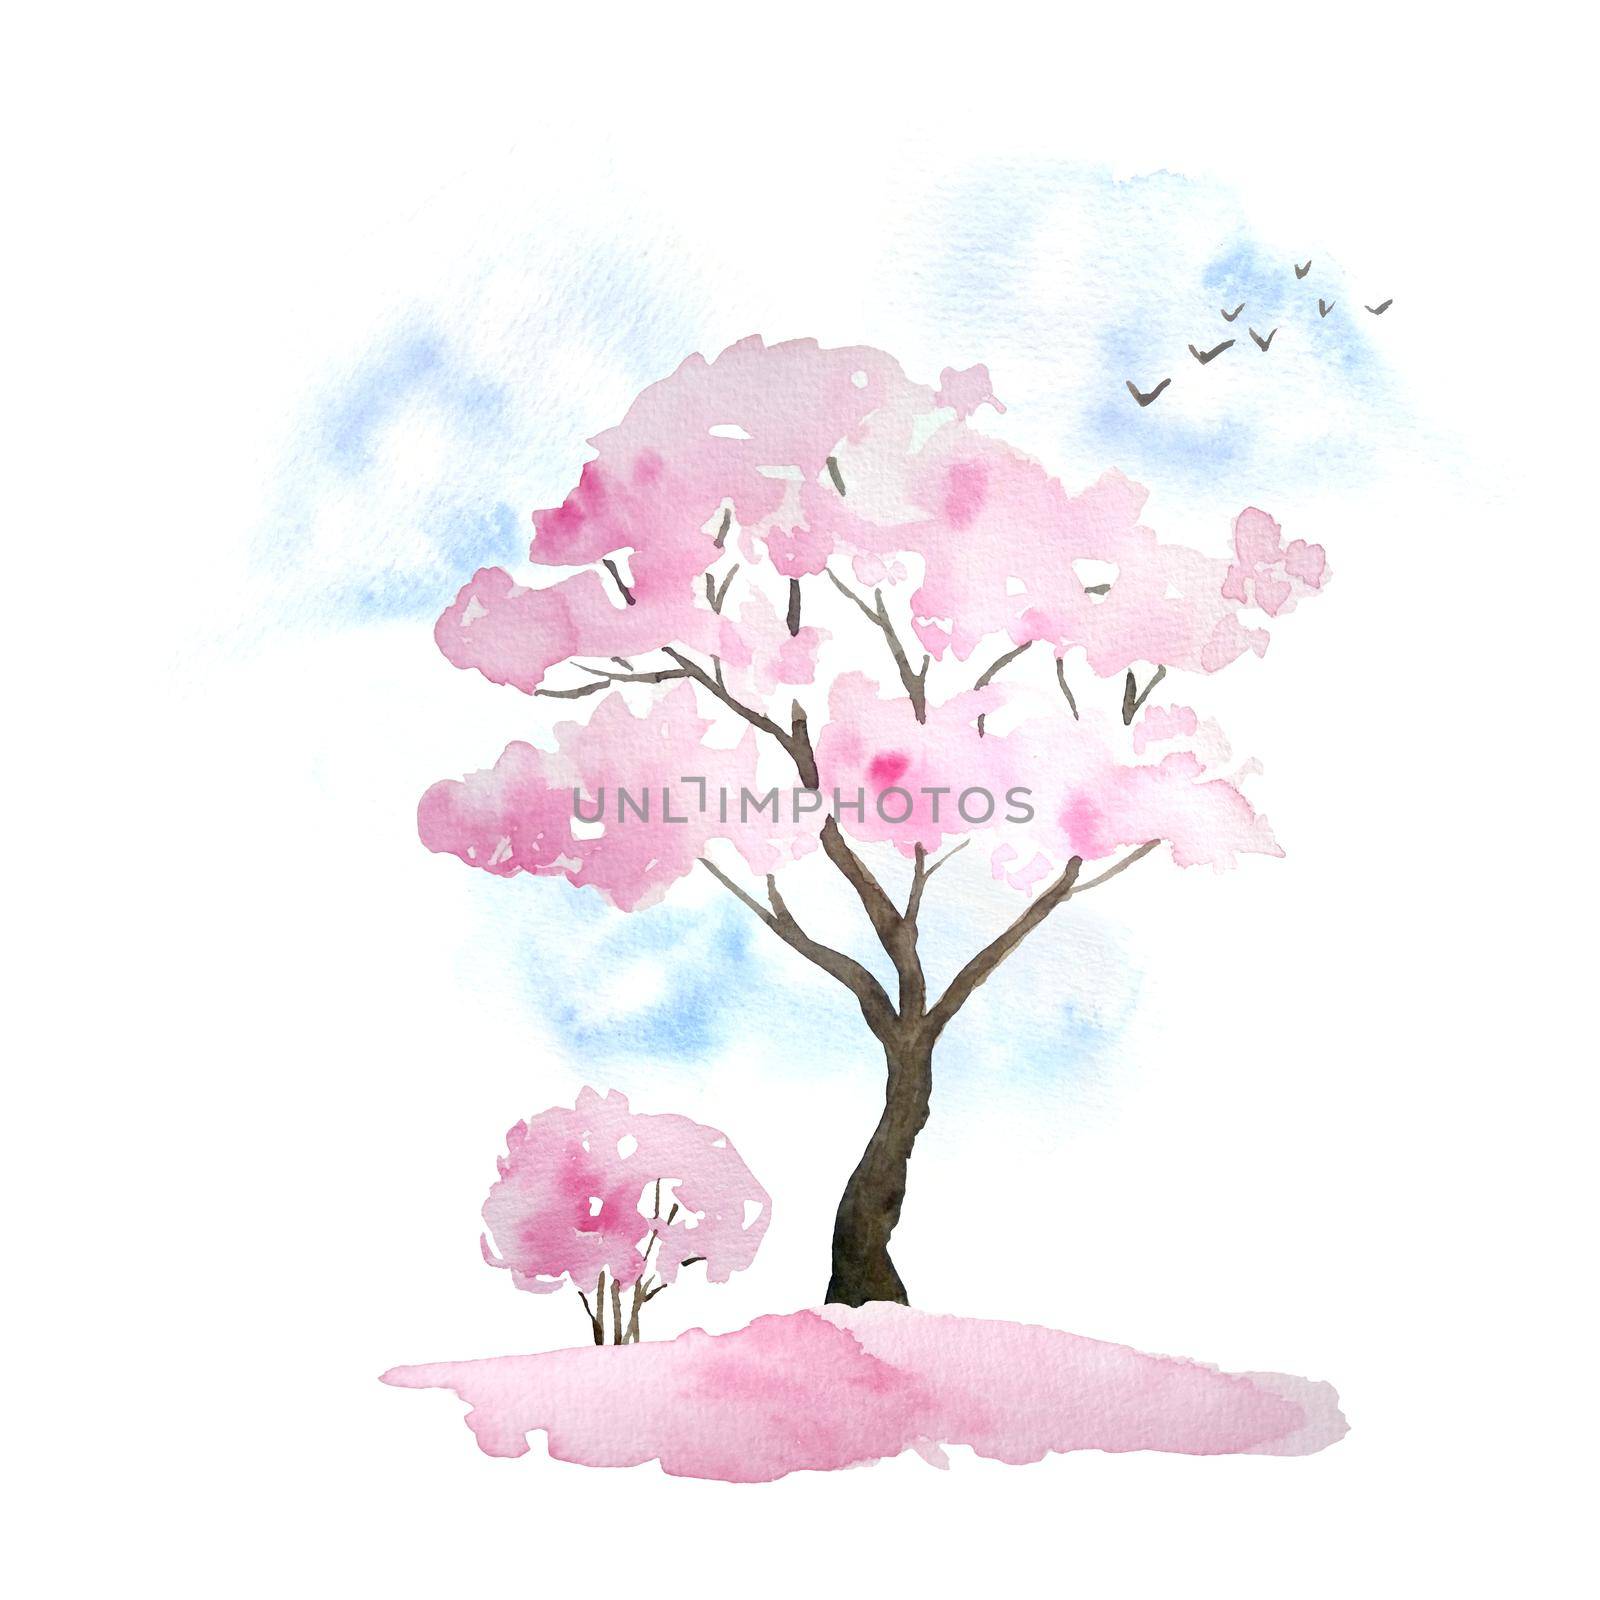 Watercolor hand drawn design illustration of pink cherry sakura tree in bloom blossom flowers, sky, birds, fallen petals. Hanami festival traditional japan japanese culture. Nature landscape plant. Spring march april concept. by Lagmar